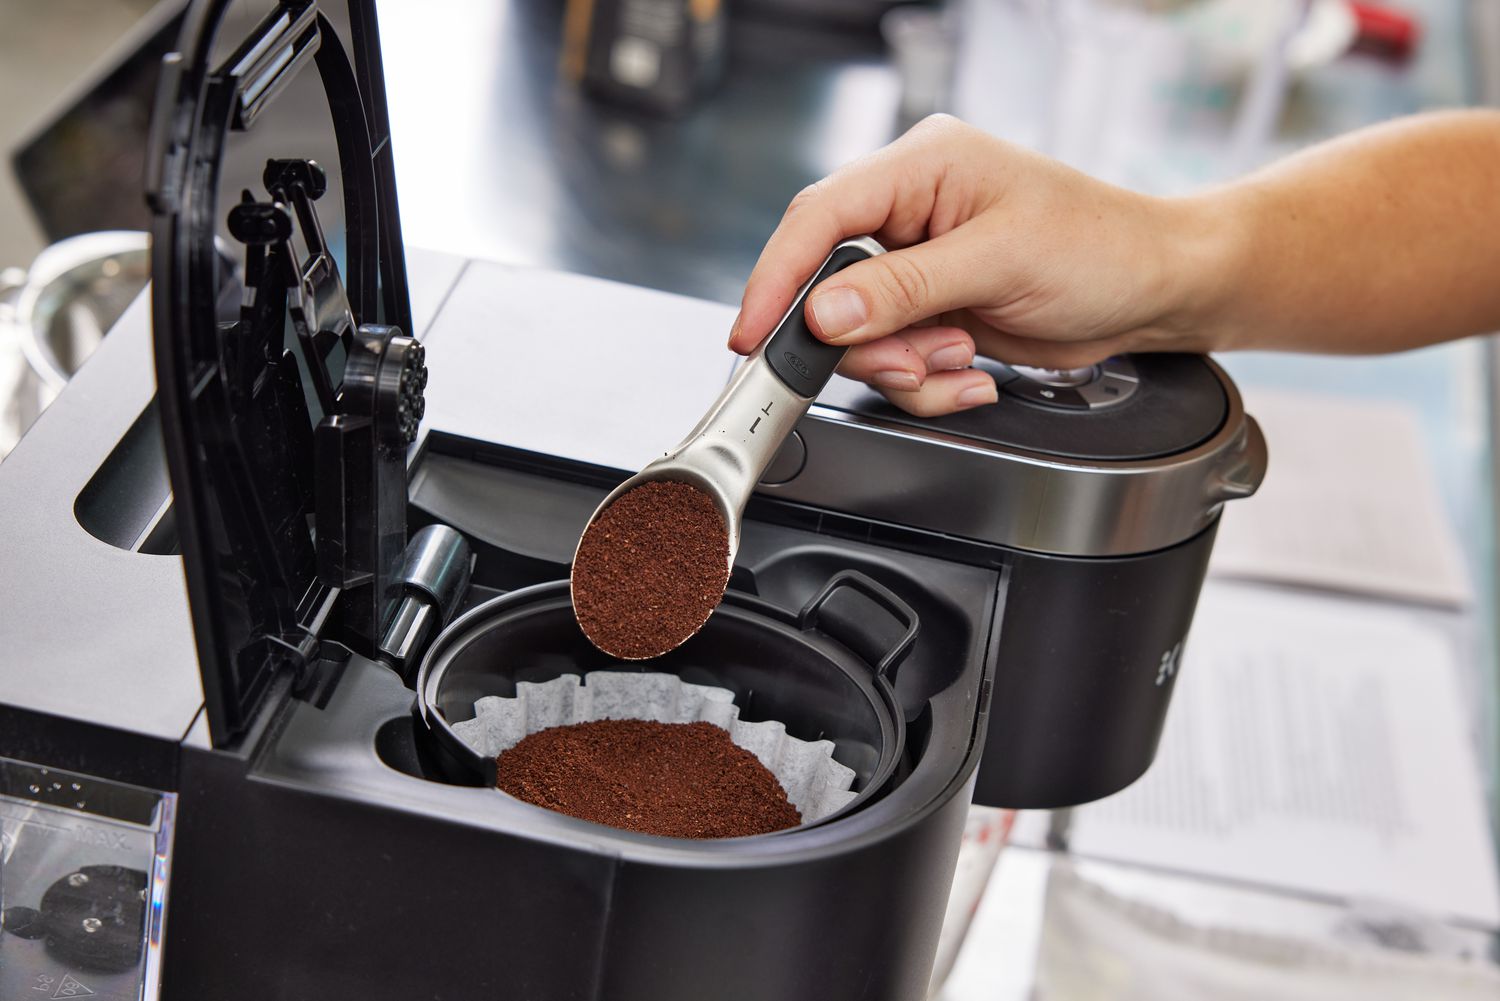 Hand pouring coffee into the Keurig K-Duo Coffee Maker